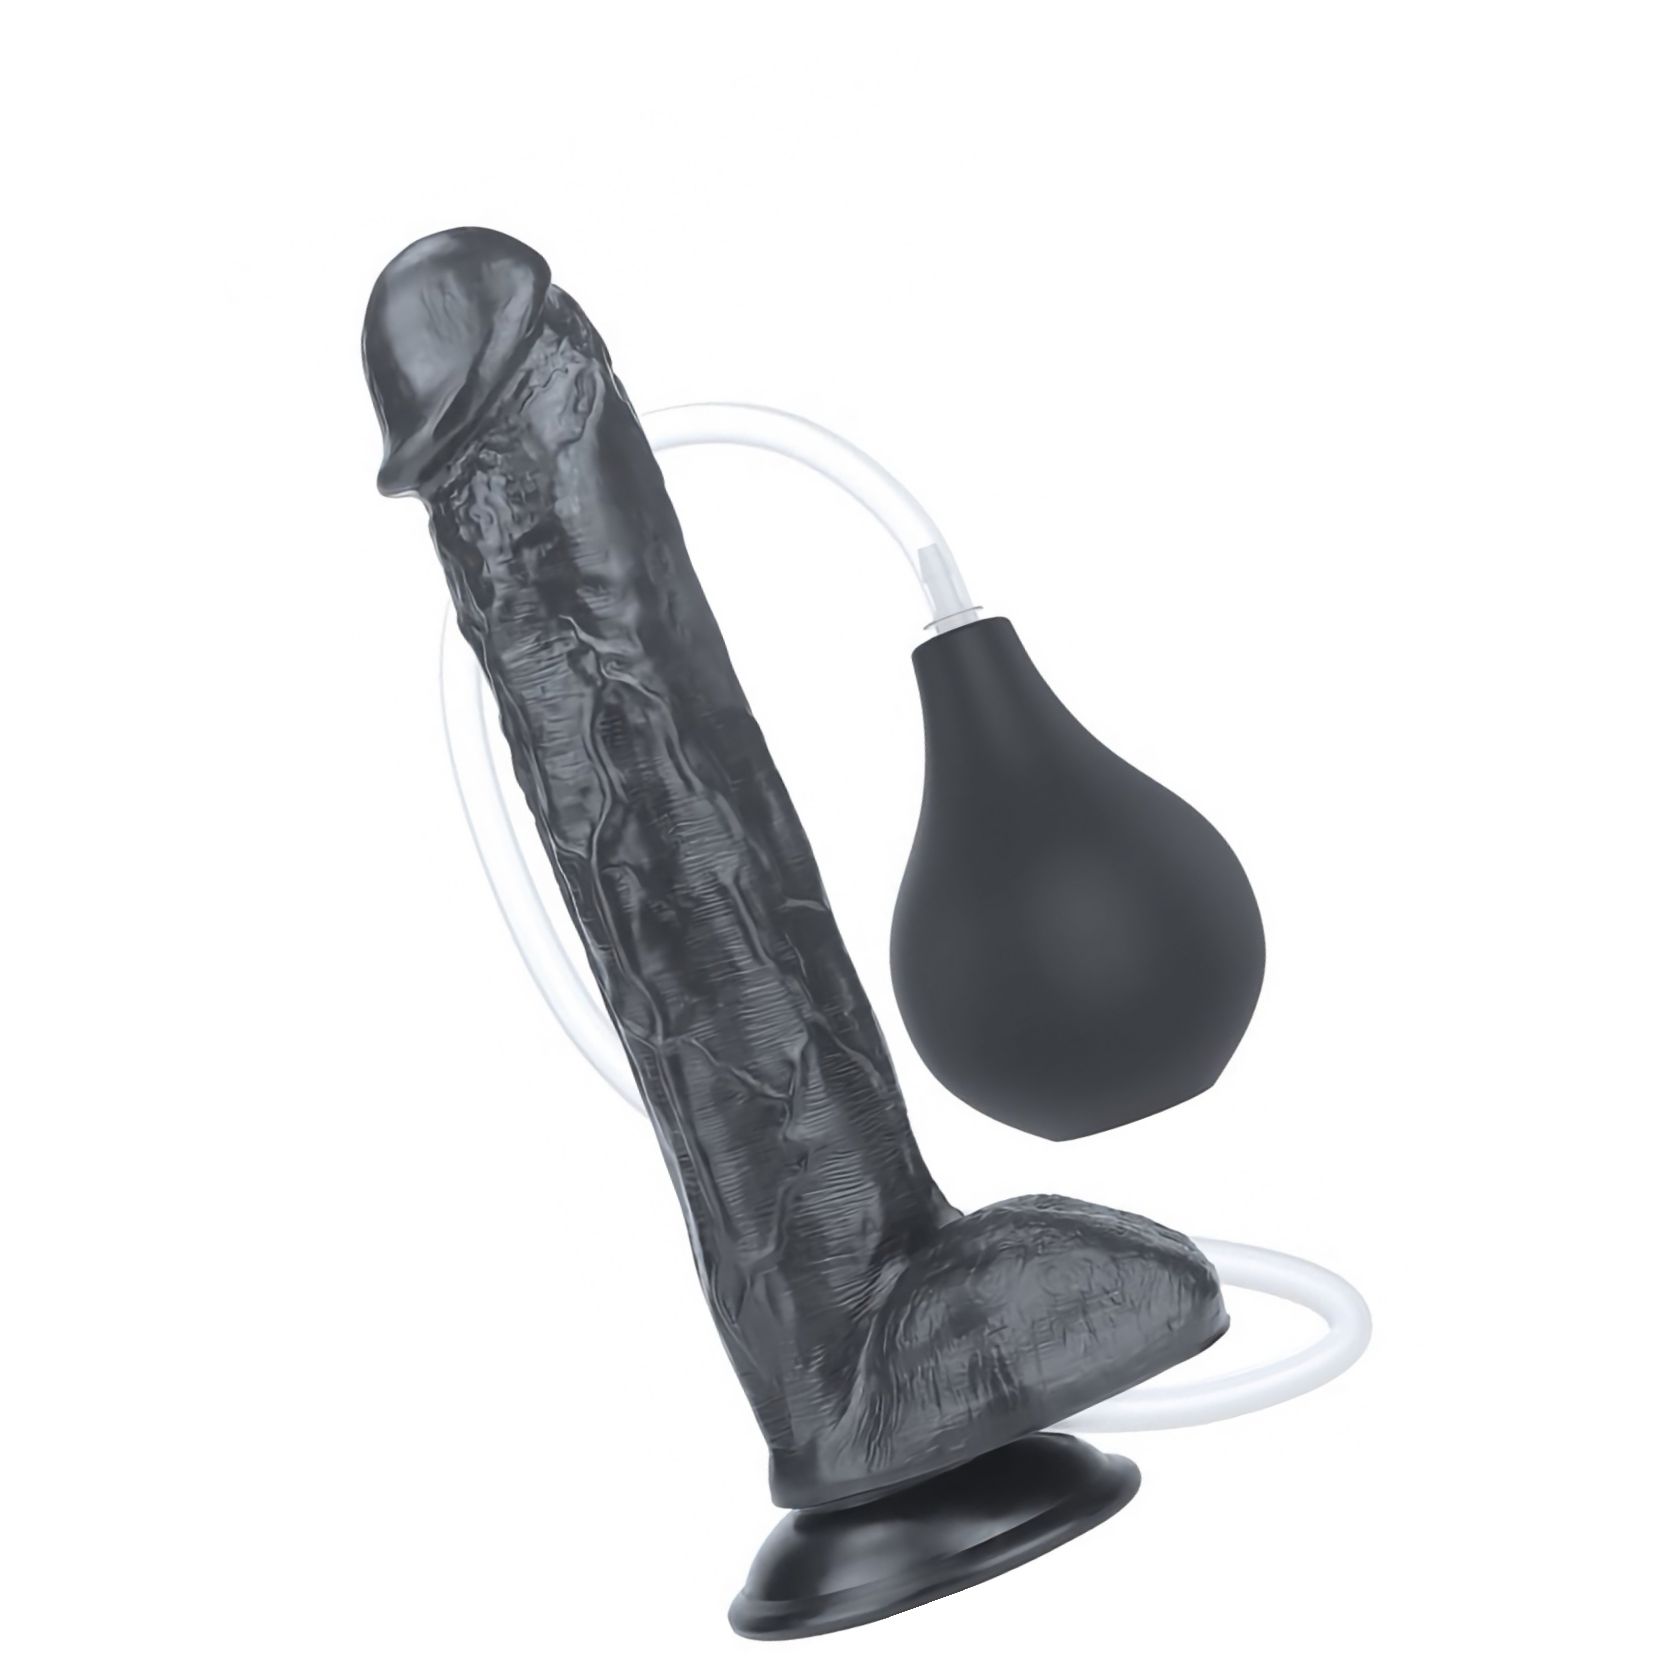 Dildo Realistic 11inch Squirting